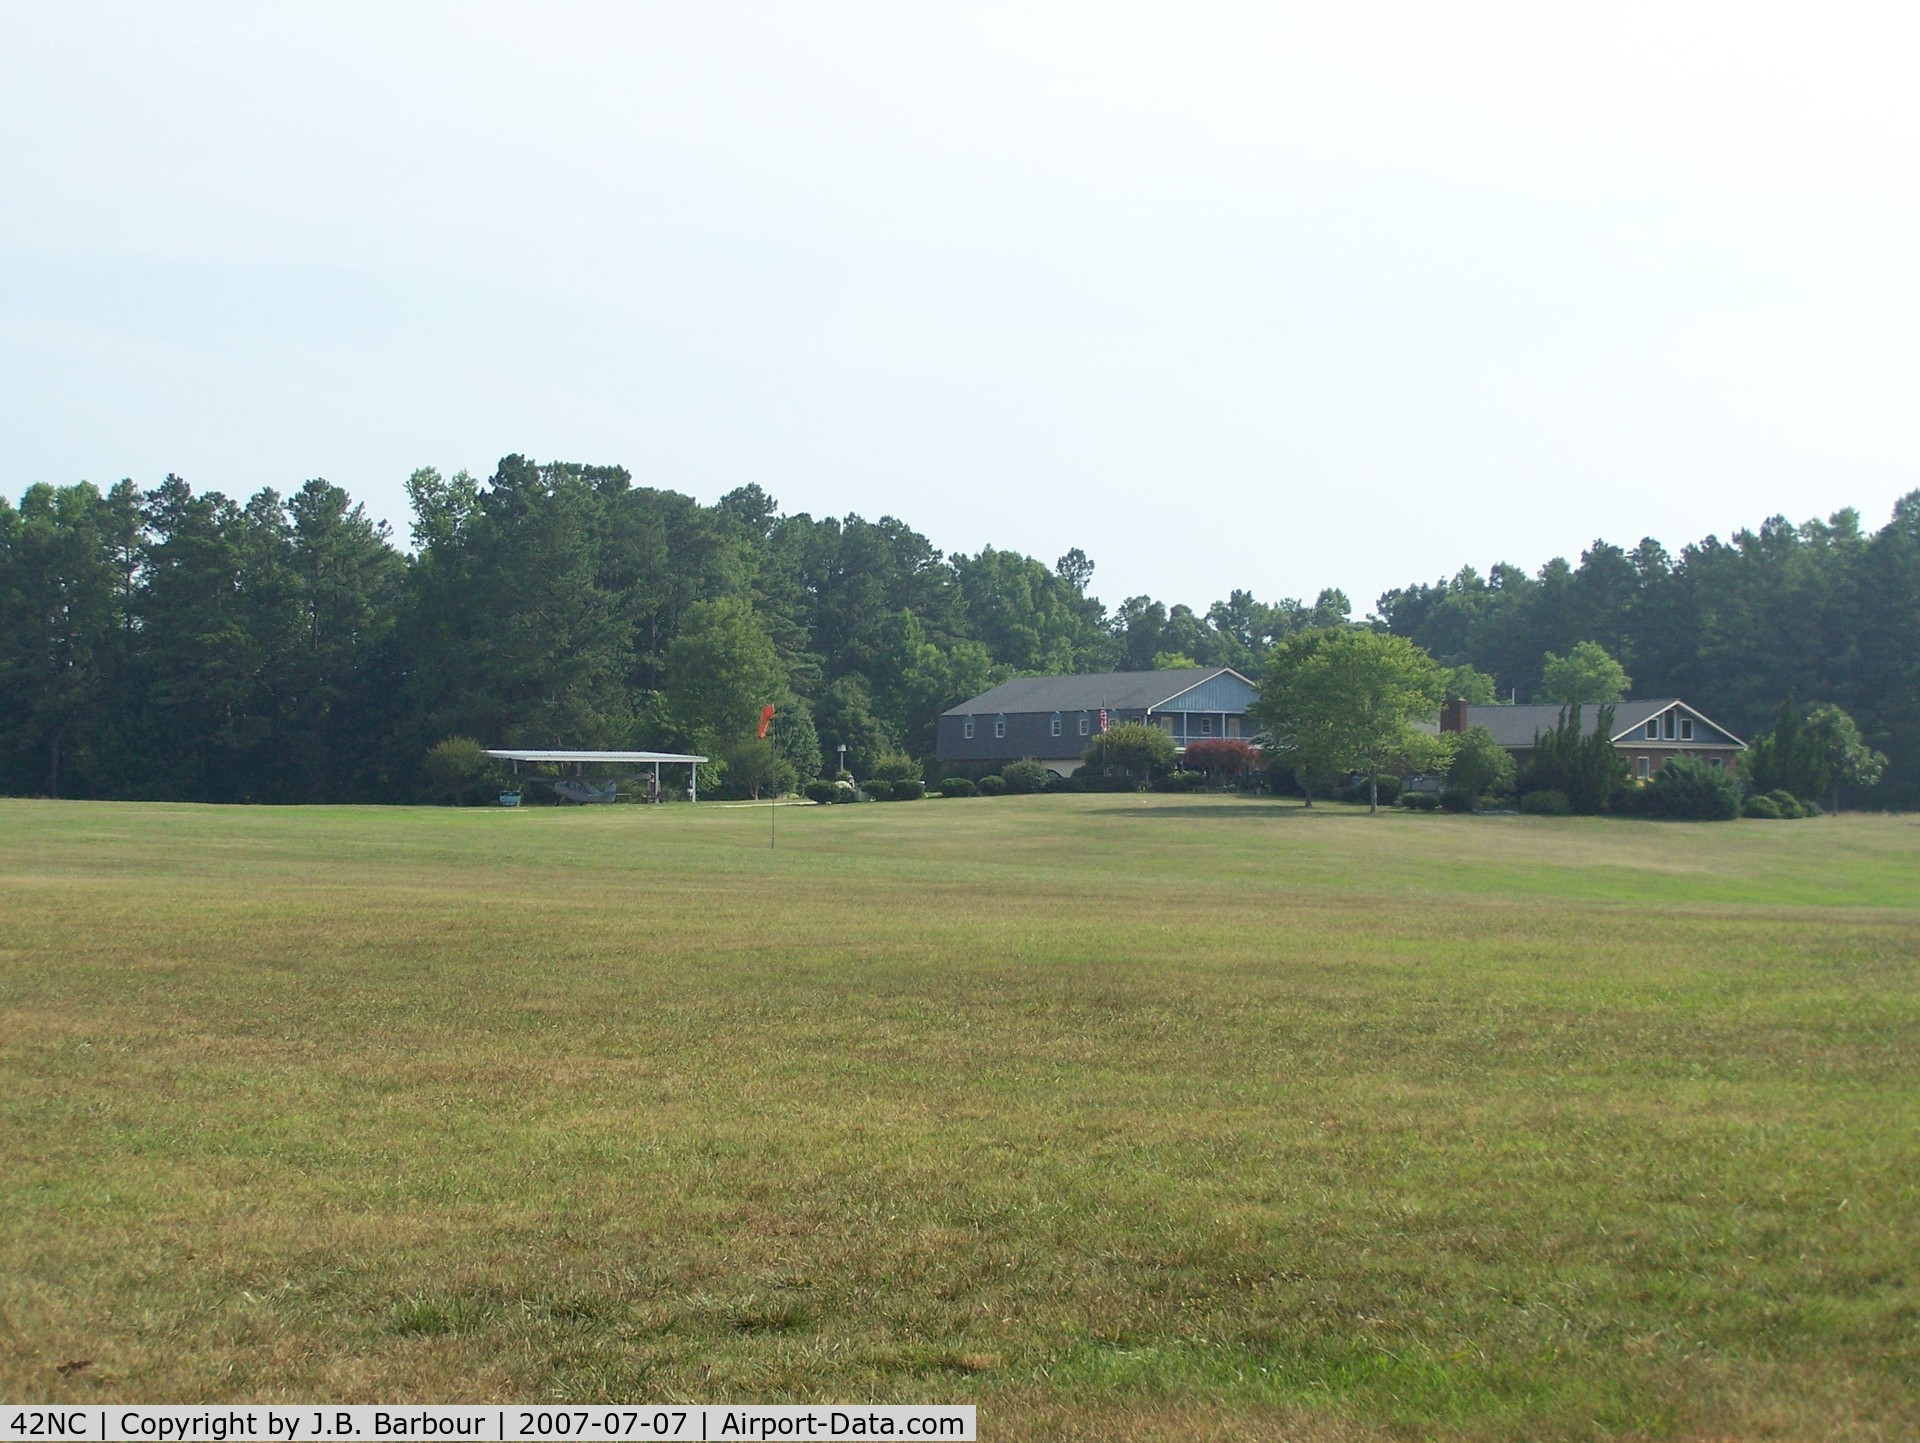 Spring Paths Airport (42NC) - What more can be said about a family with a airstrip in the front yard.